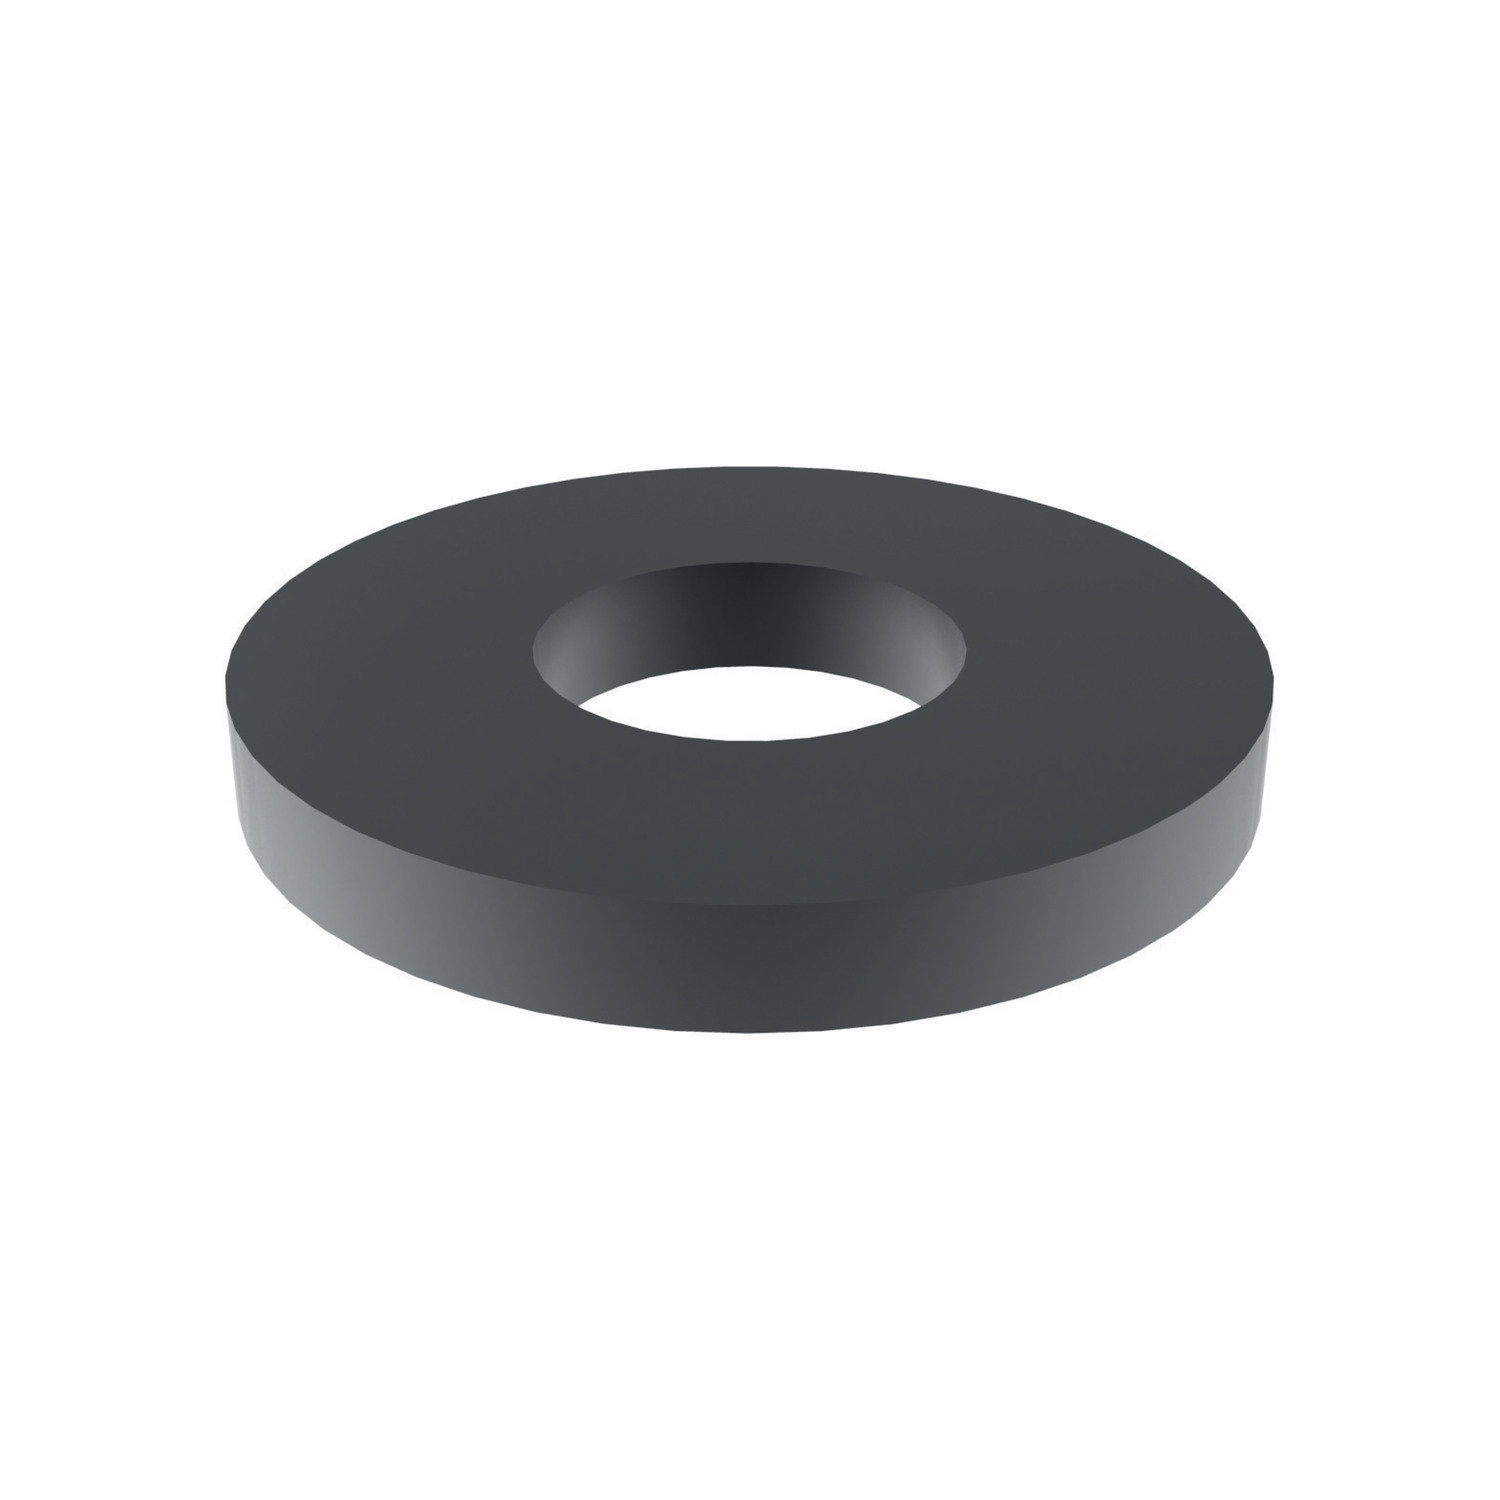 Washers - Steel Our range of washers for use with fixturing nuts: plain, spherical seat, dished, captive and countersunk designs. Stainless versions available as indicated.